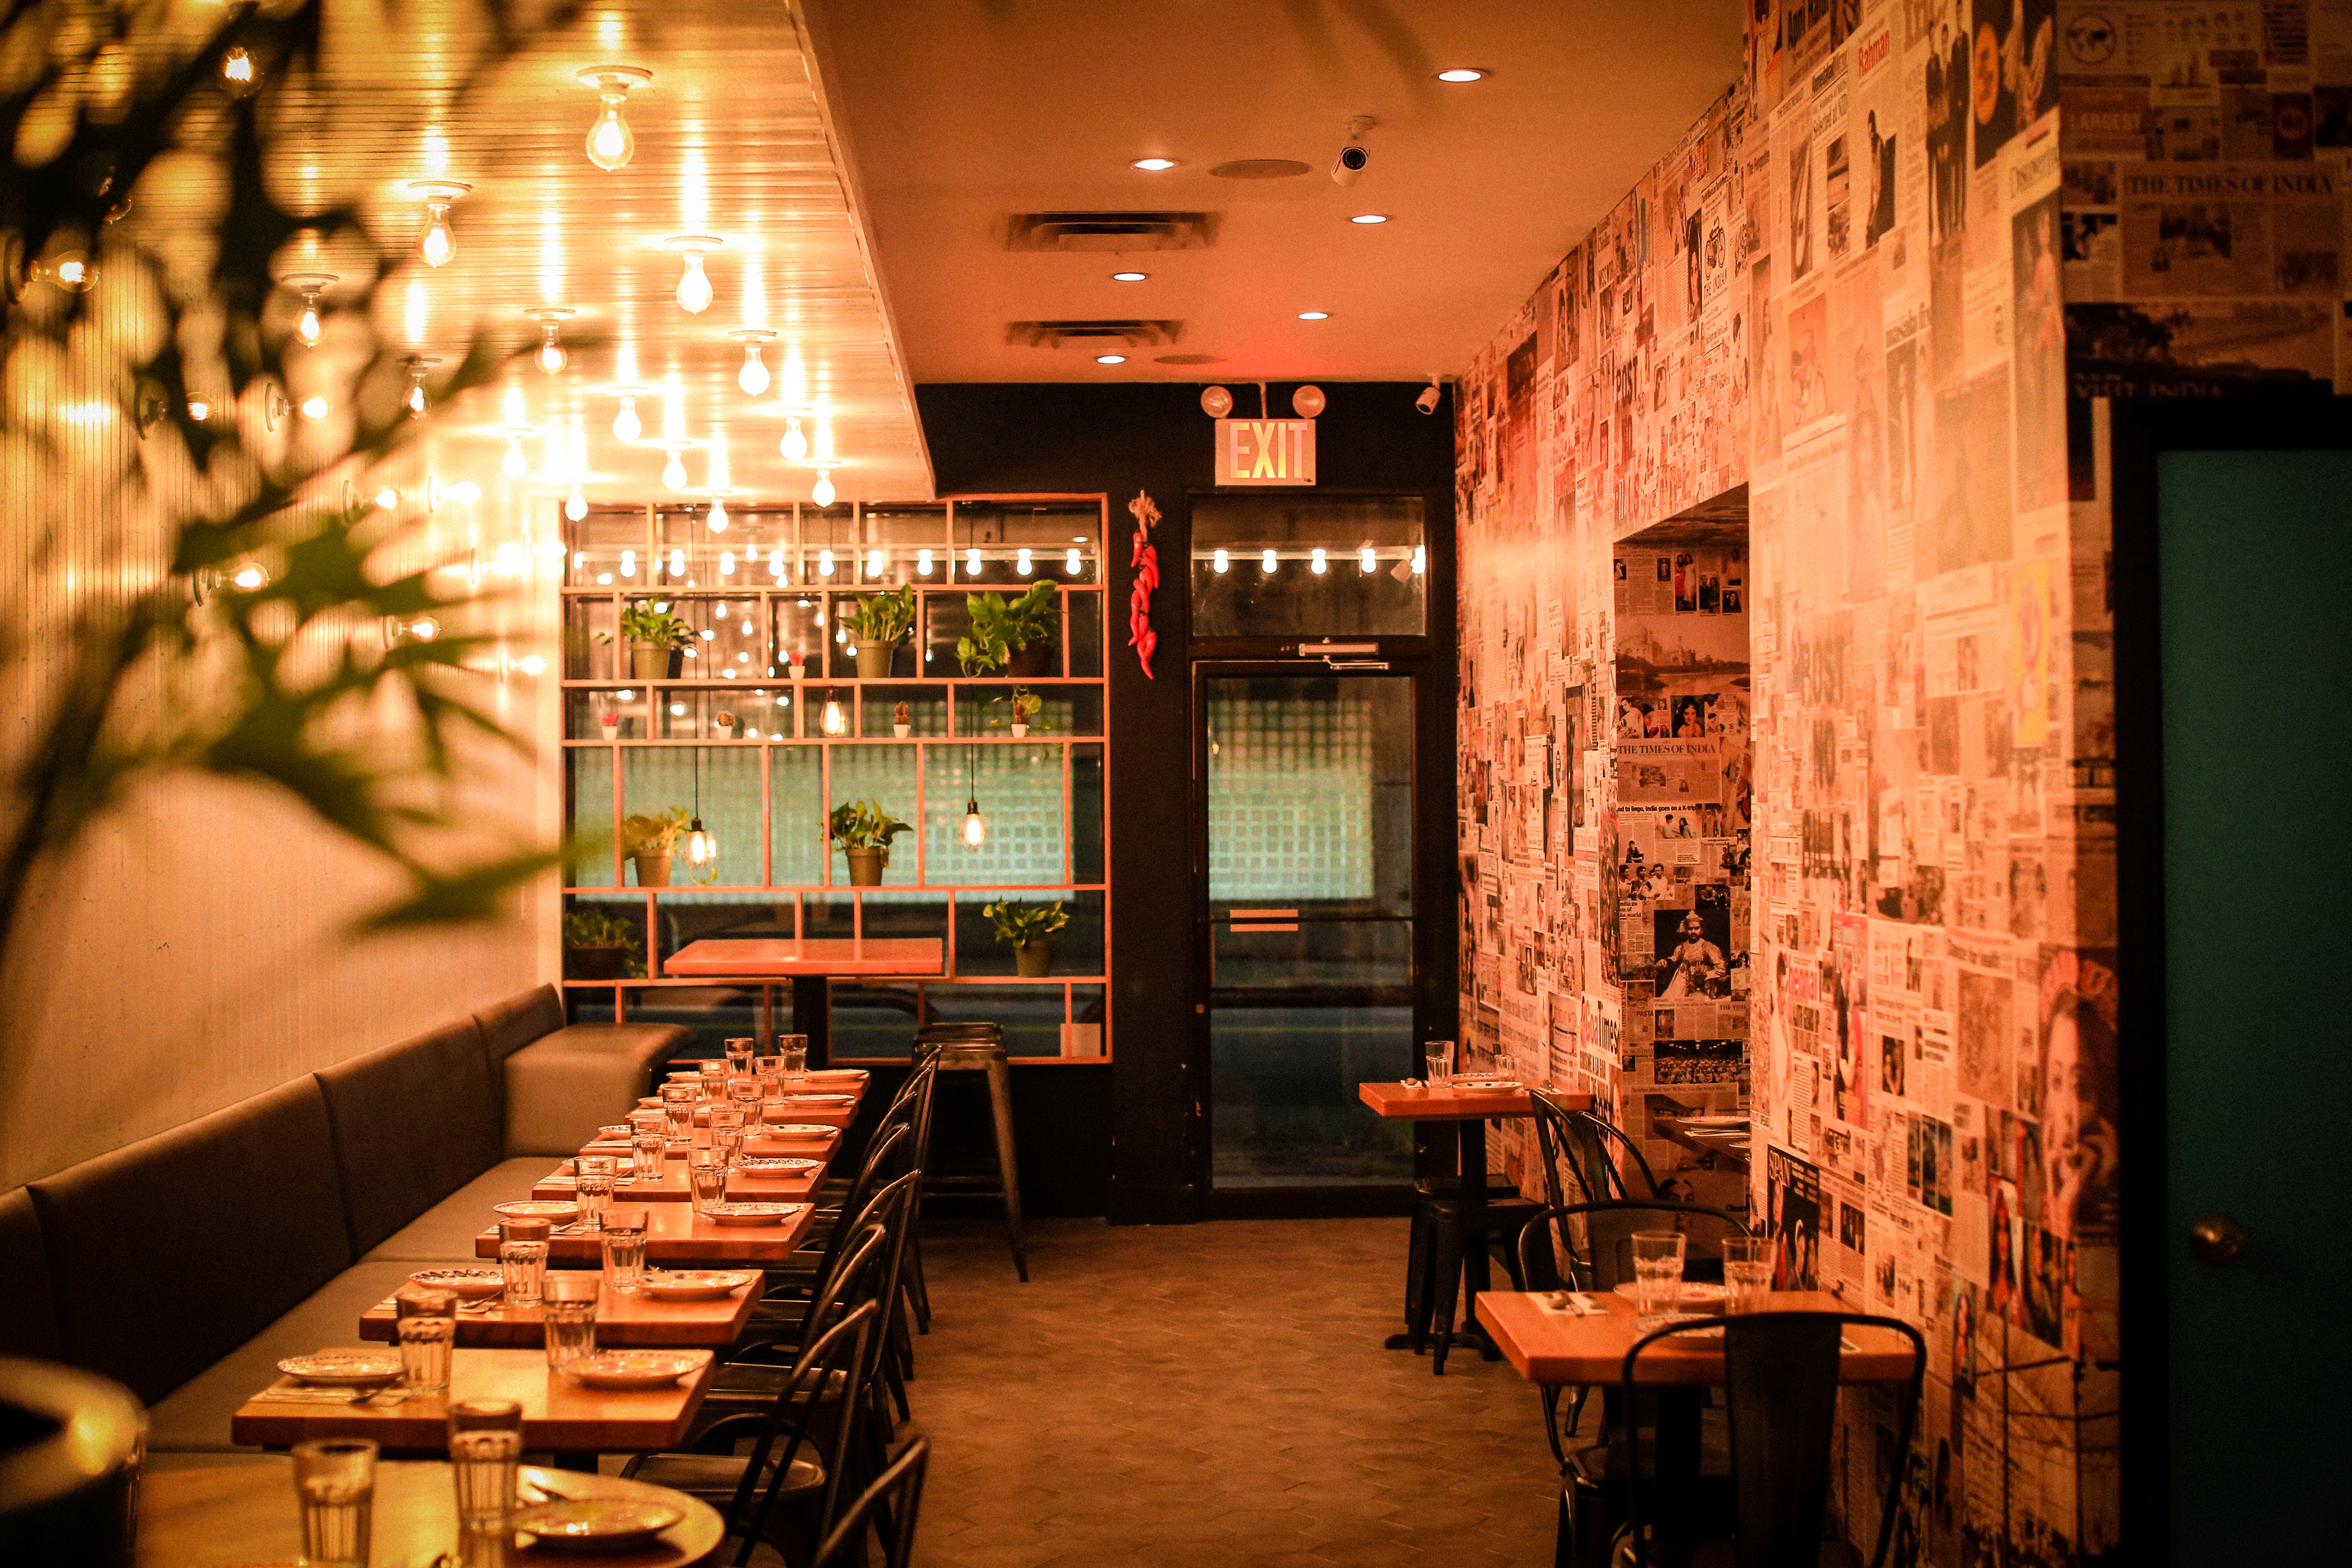 14 Best Indian Restaurants In Nyc To Try This Week